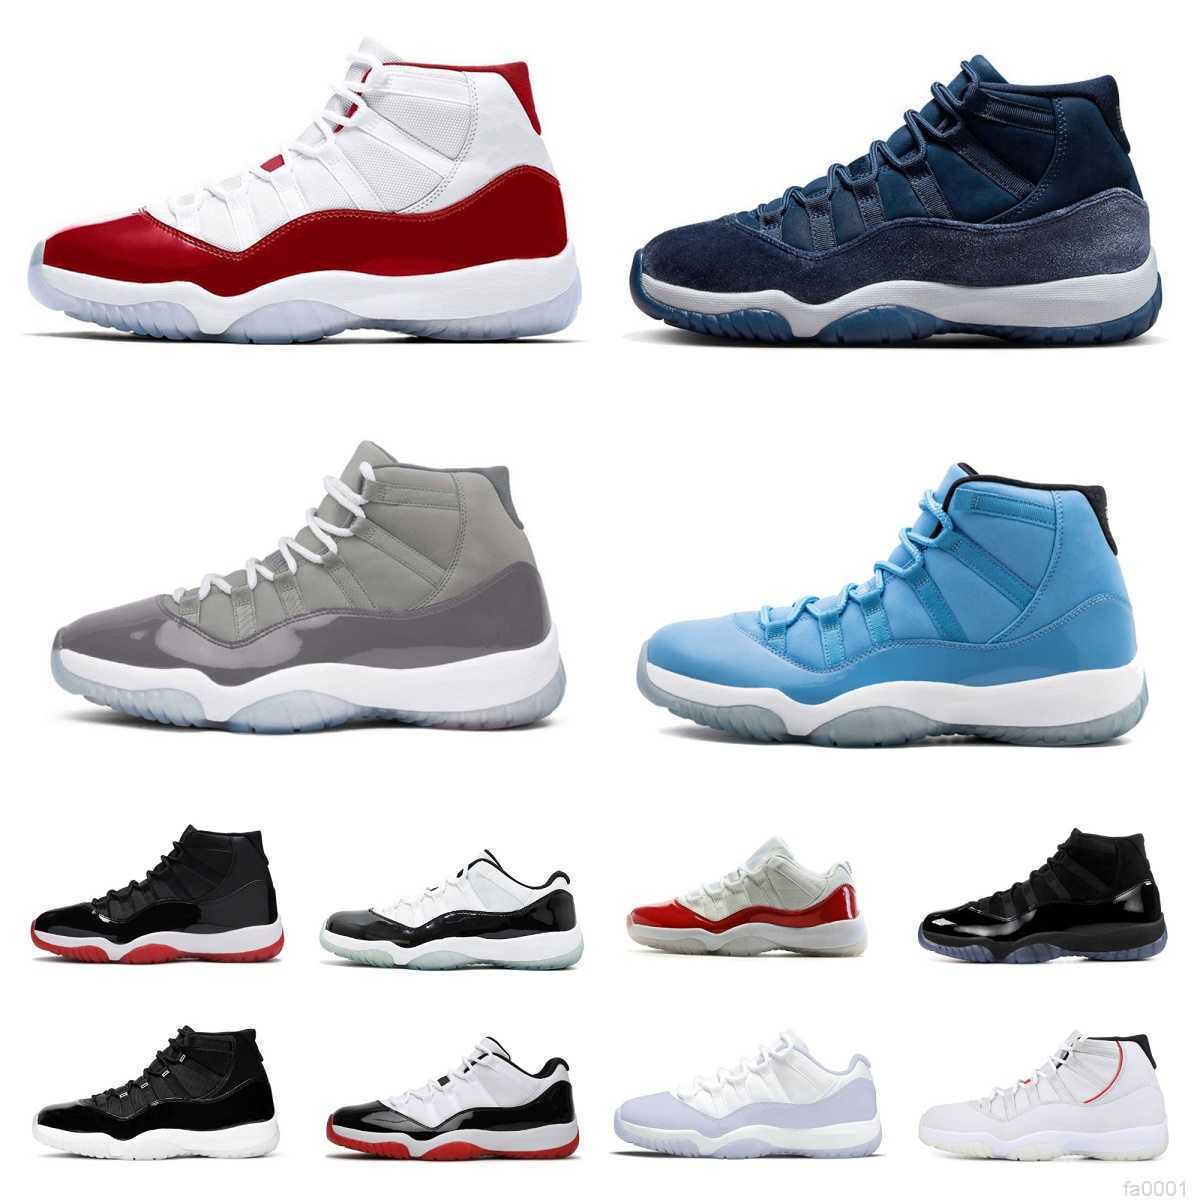 

Retro High 11 Basketball Shoes Jumpman 11s Jubilee 25th Anniversary Pure Violet Midnight Navy Cool Grey Cap and Gown Concord 45 Playoffs Bred Low Designer Sneakers, Heiress